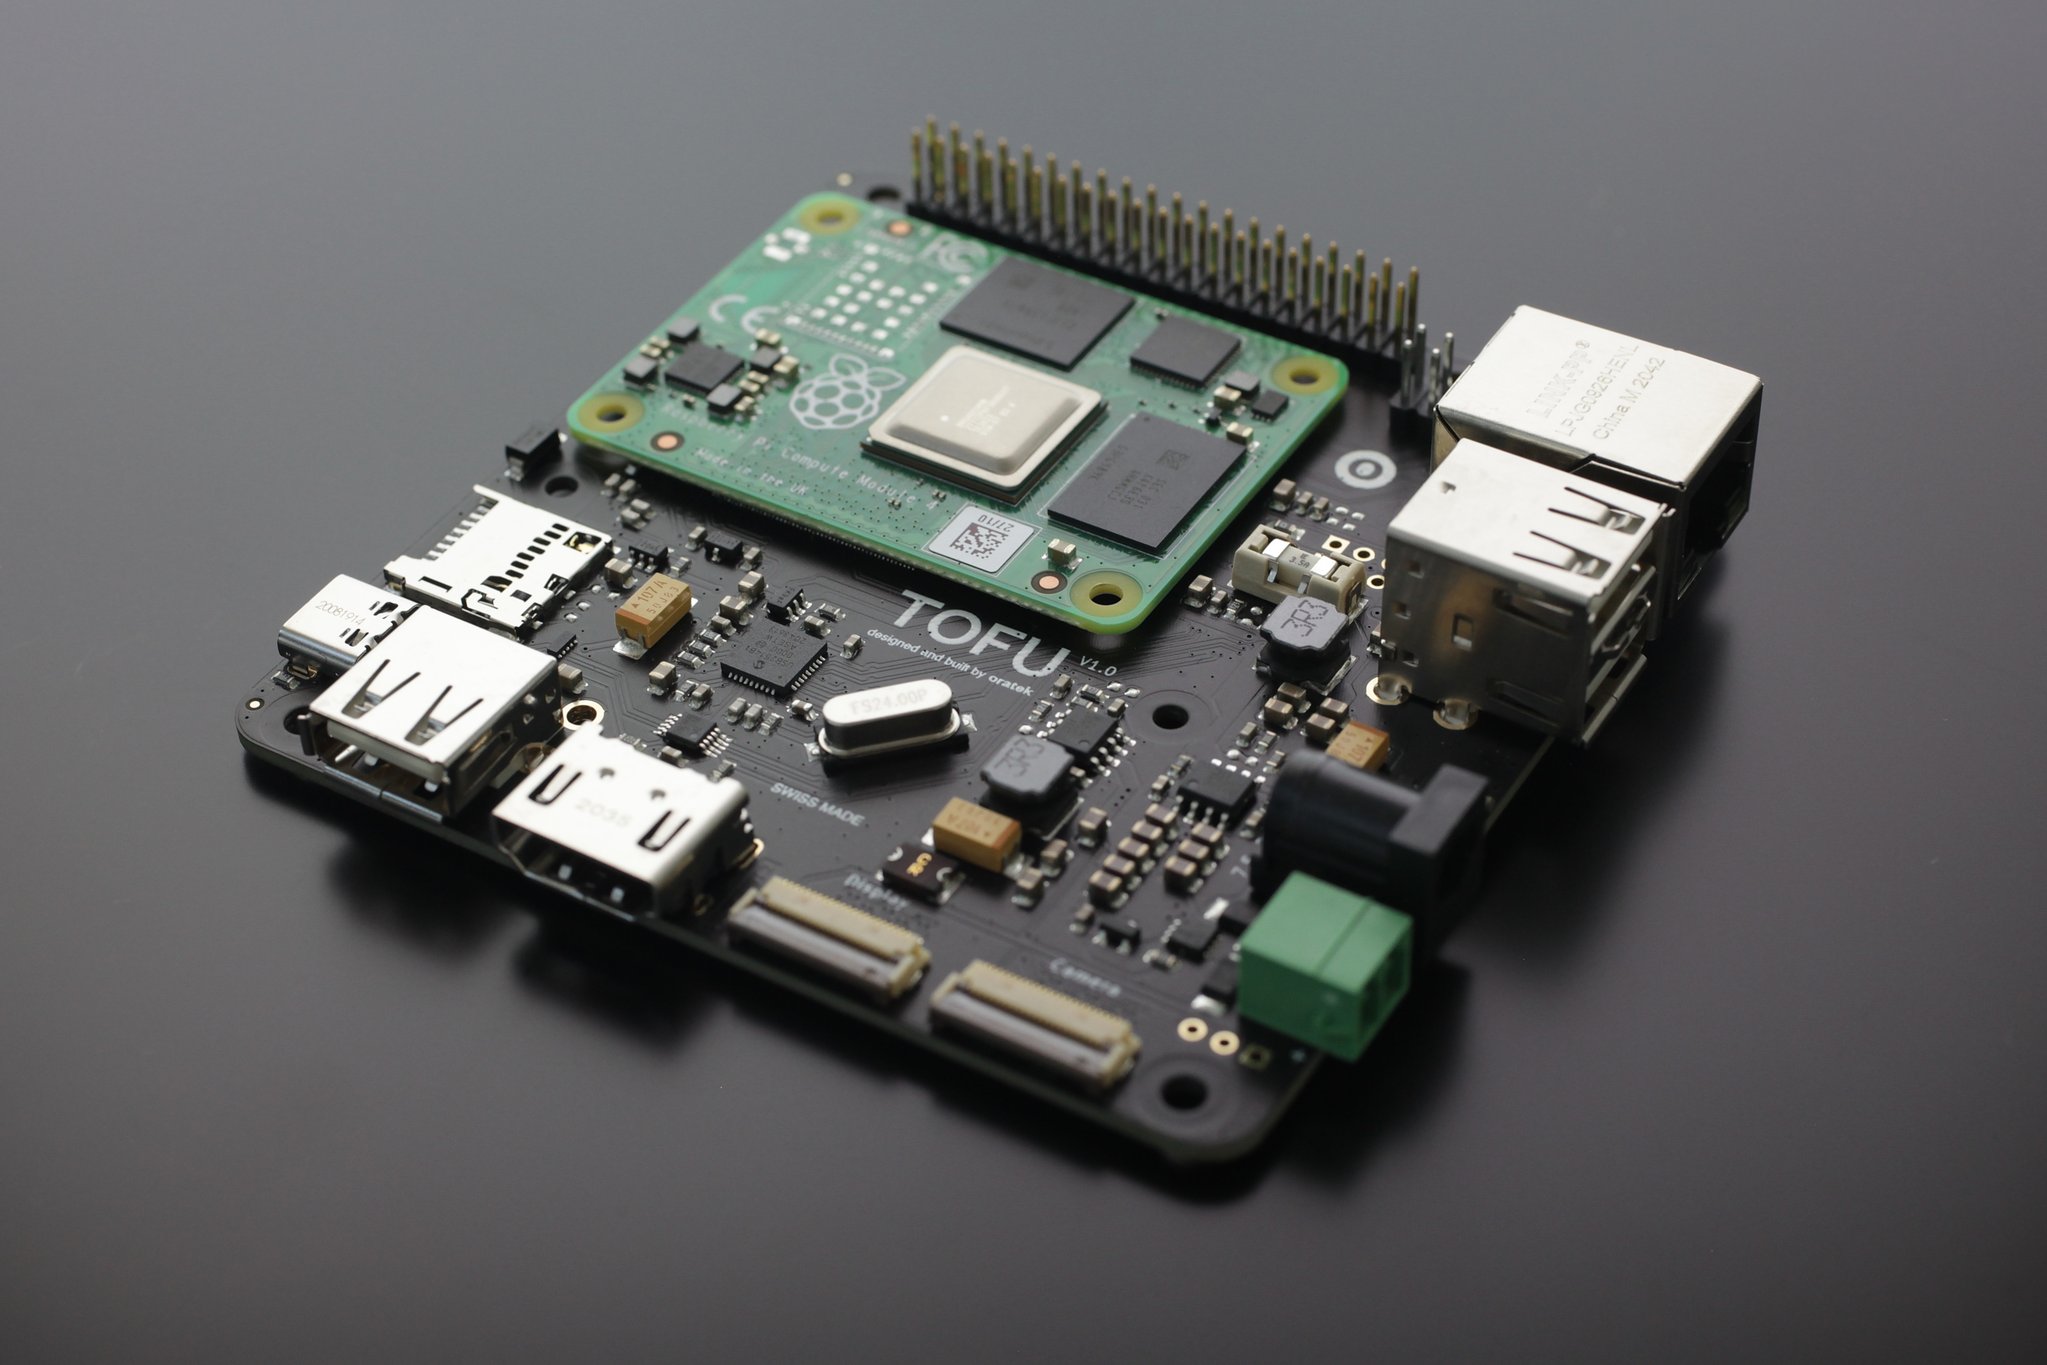 raspberry-pi-compute-module-4-carrier-board-‘tofu’-could-be-everything-we-need